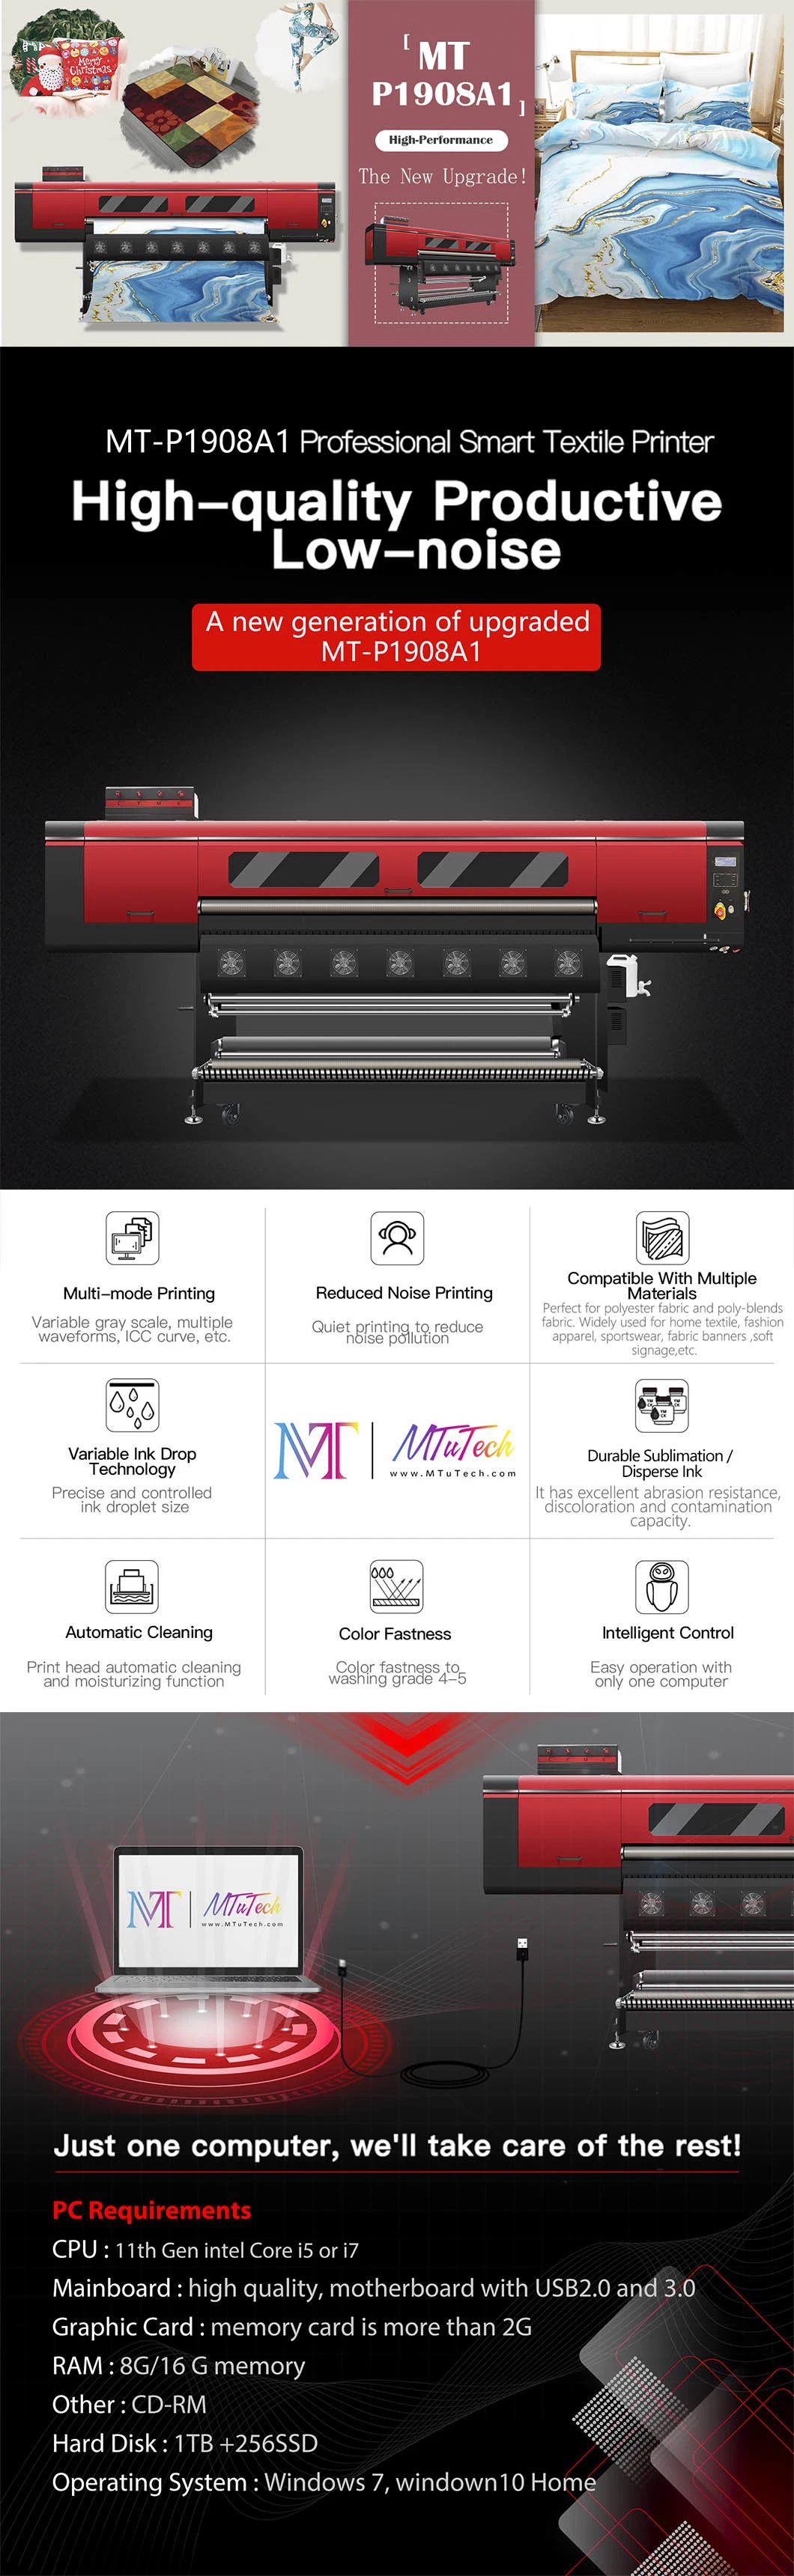 MT High Performance Large format Dye Sublimation Printer Machine MT-P1908A1 for Home Textile, Sportswear and Soft Signage Printing